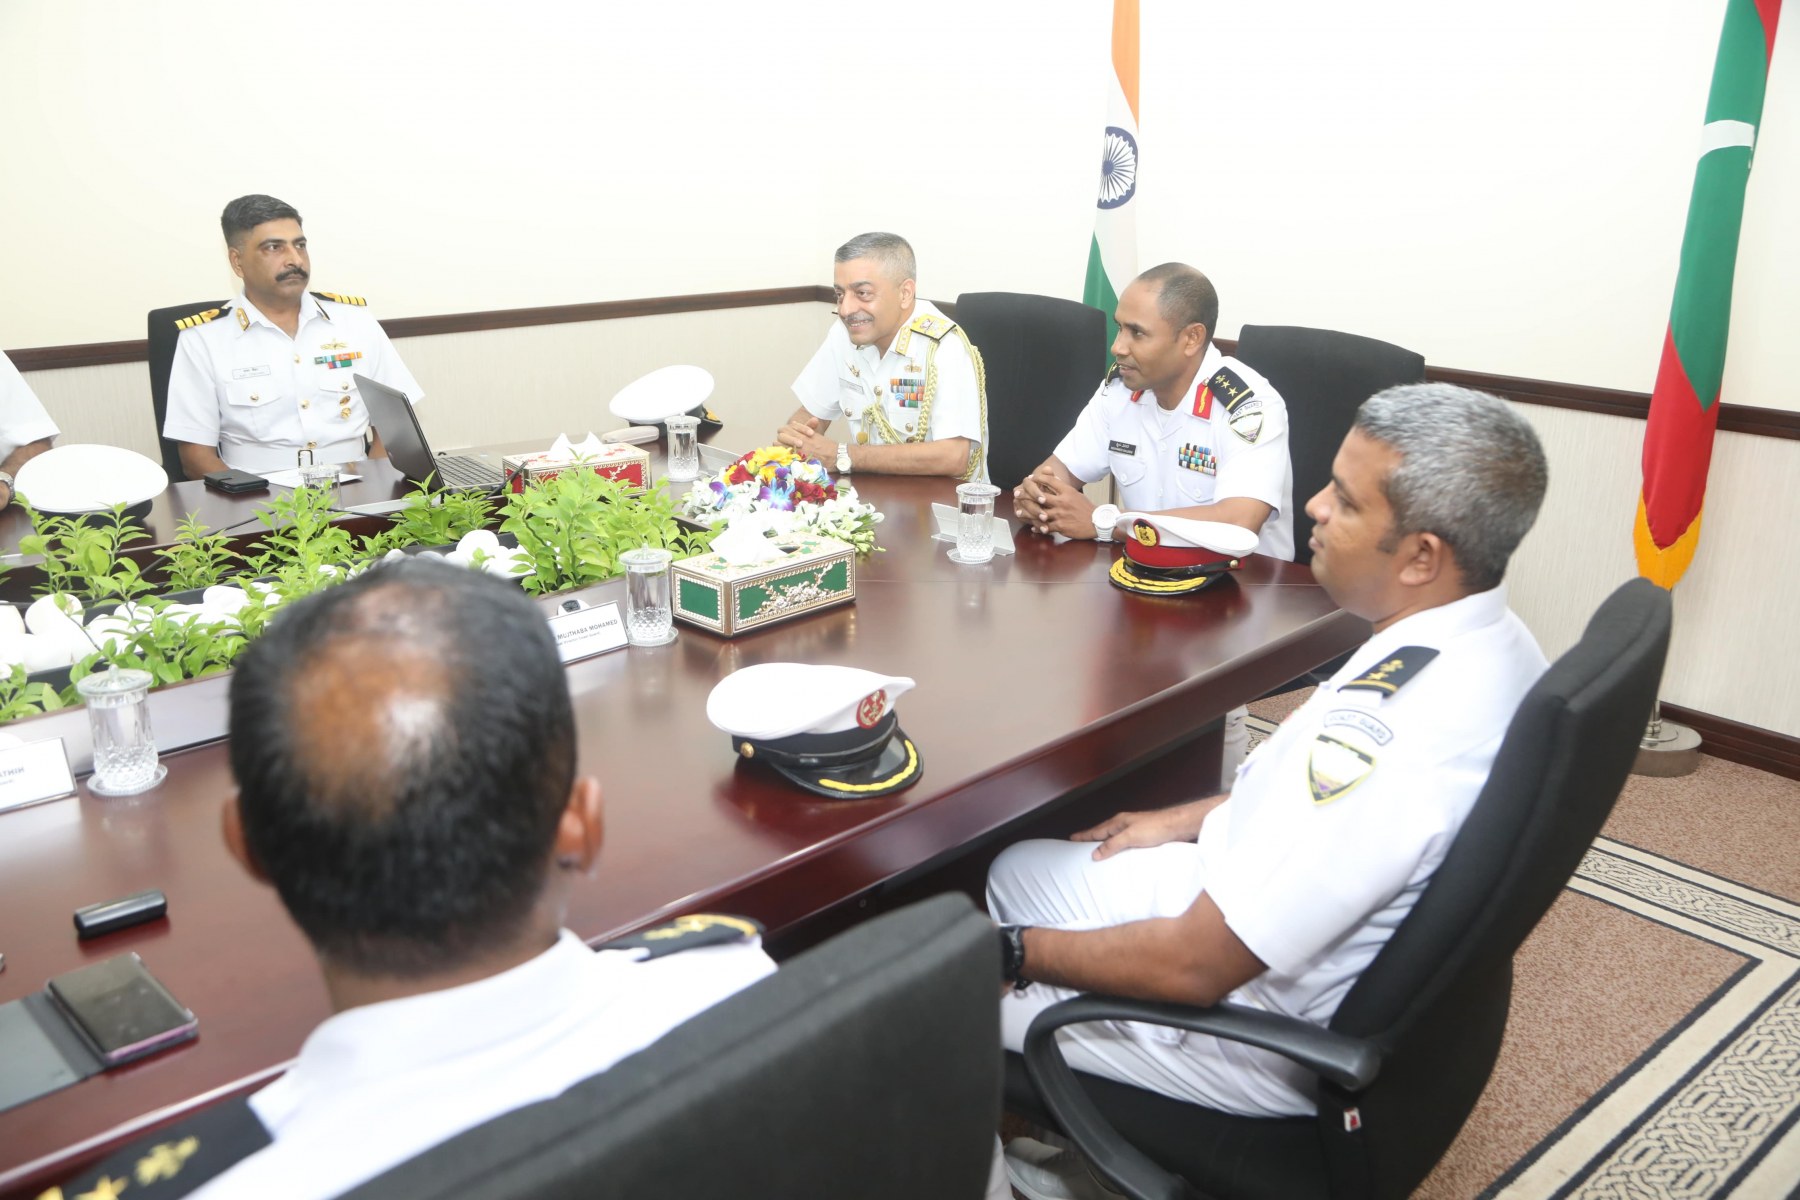 Chief Hydrographer's Visit to Maldives